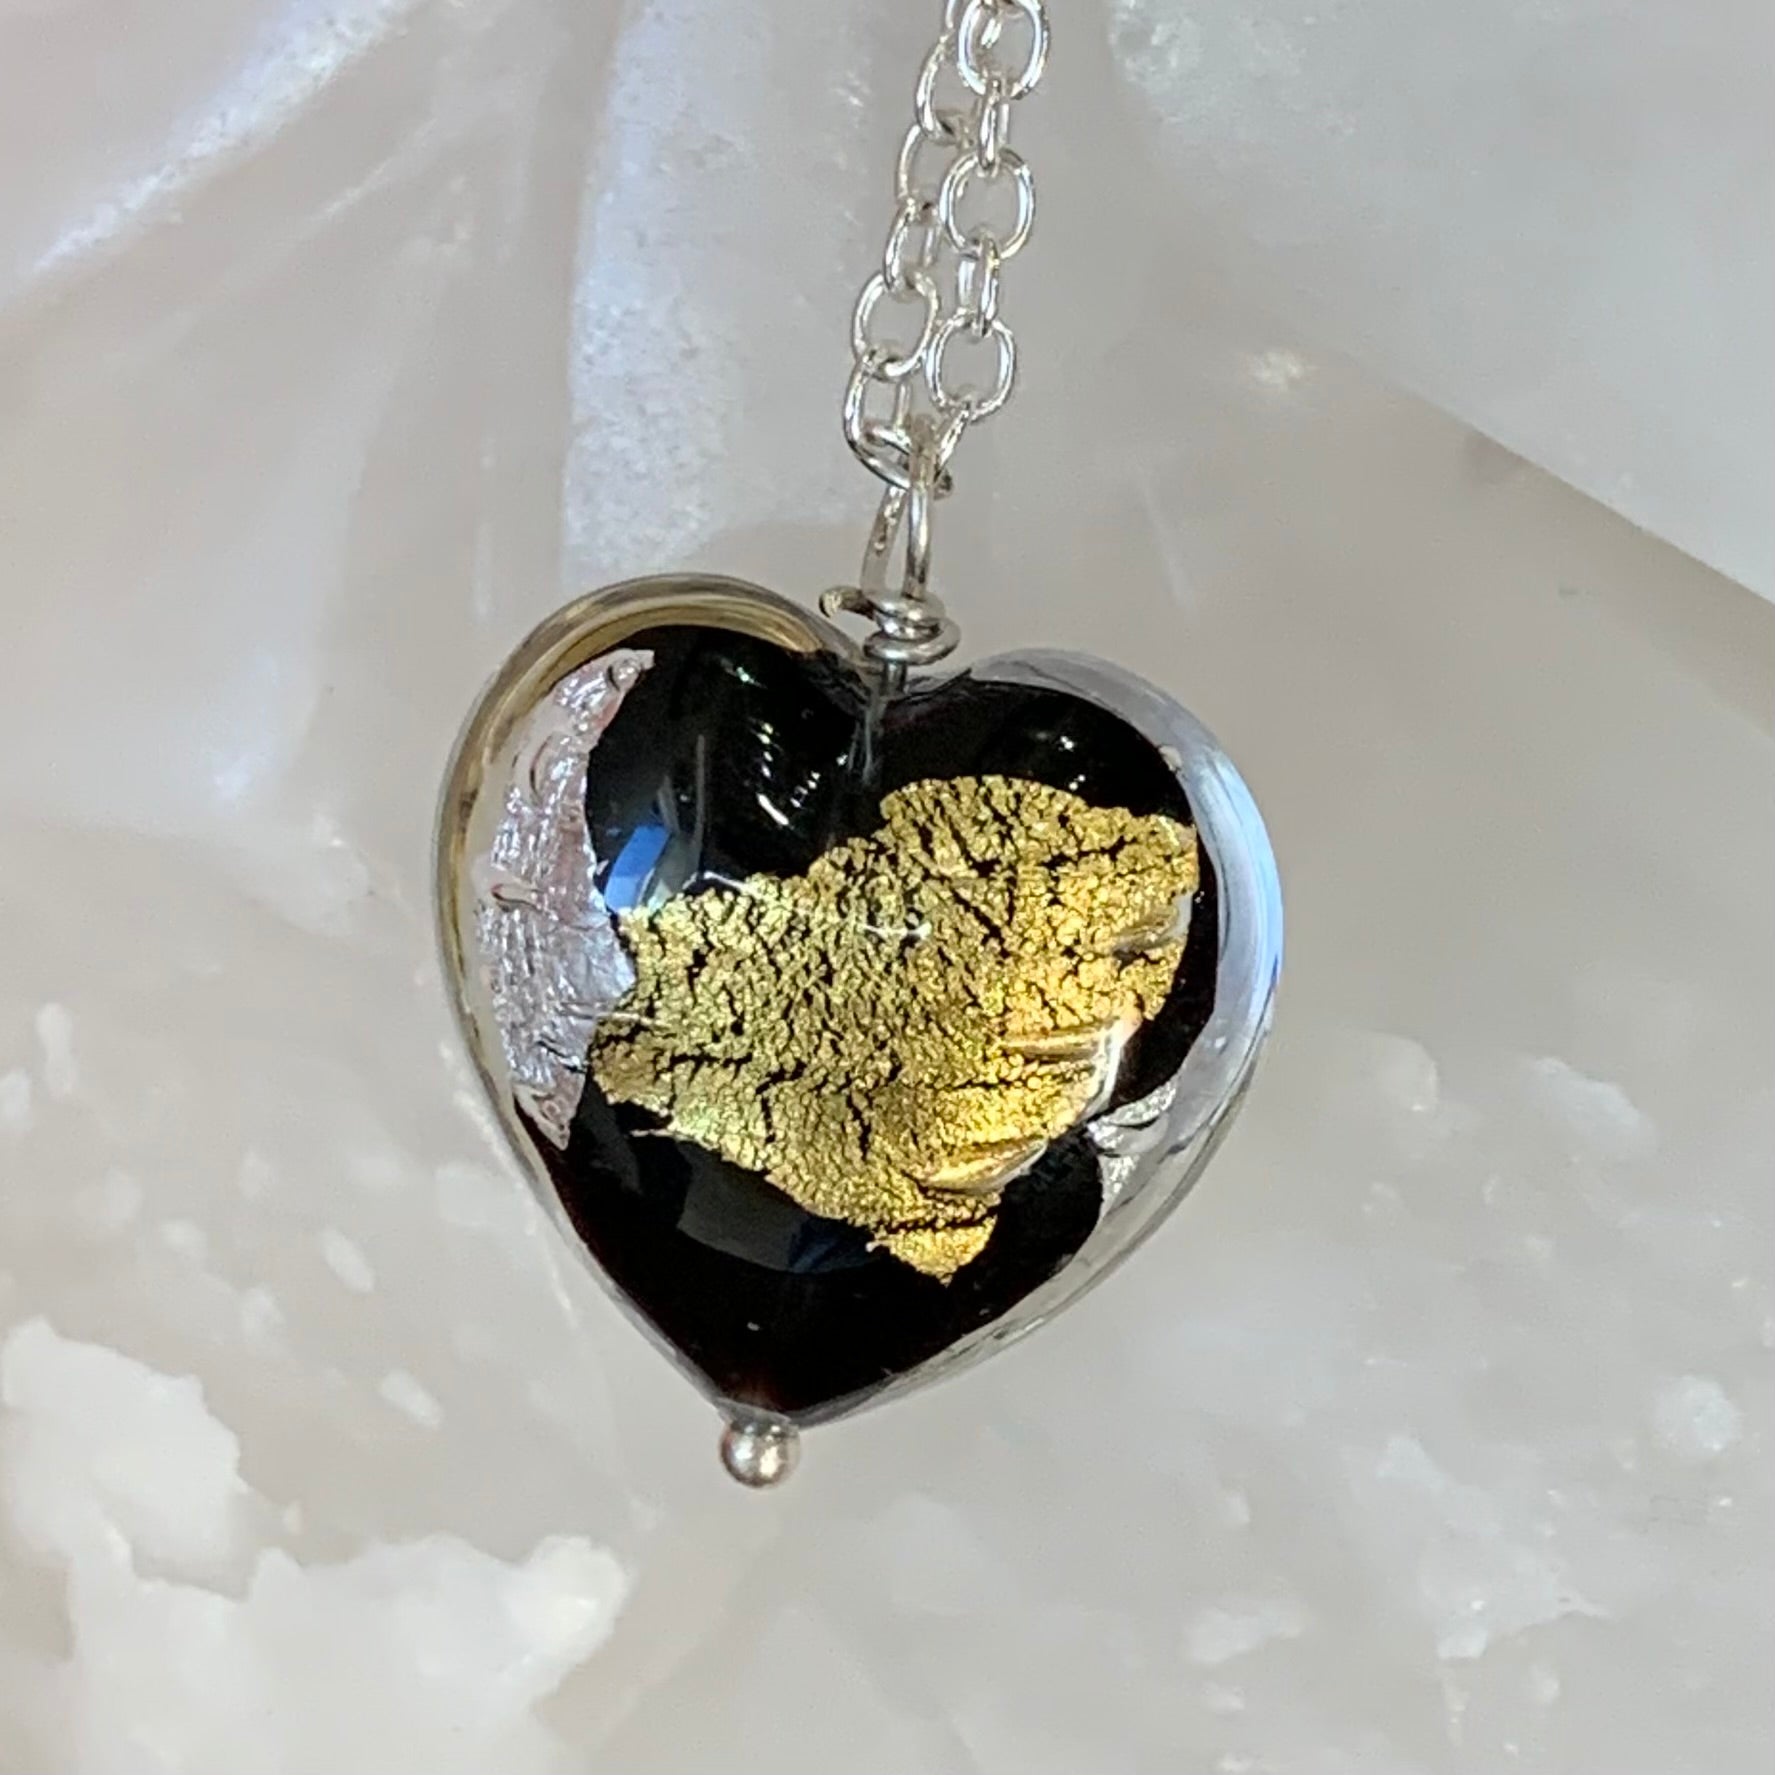 Murano Glass Heart Pendant with Gold & Silver Leaf